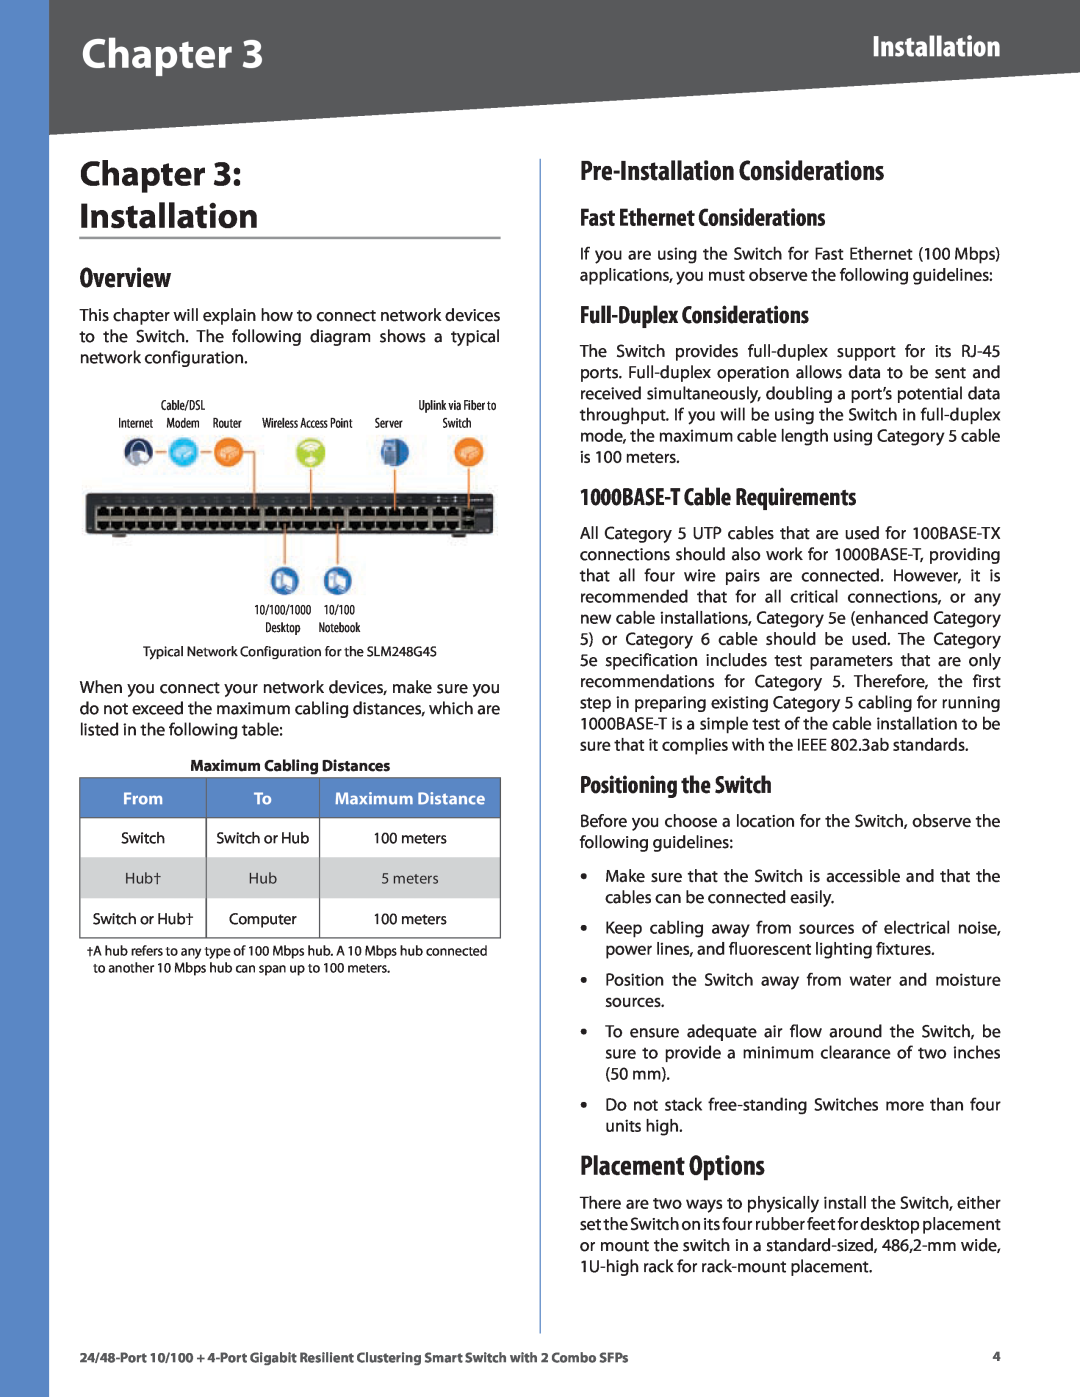 Linksys SLM248G4S (G5) manual Chapter Installation, Overview, Pre-Installation Considerations, Placement Options, From 